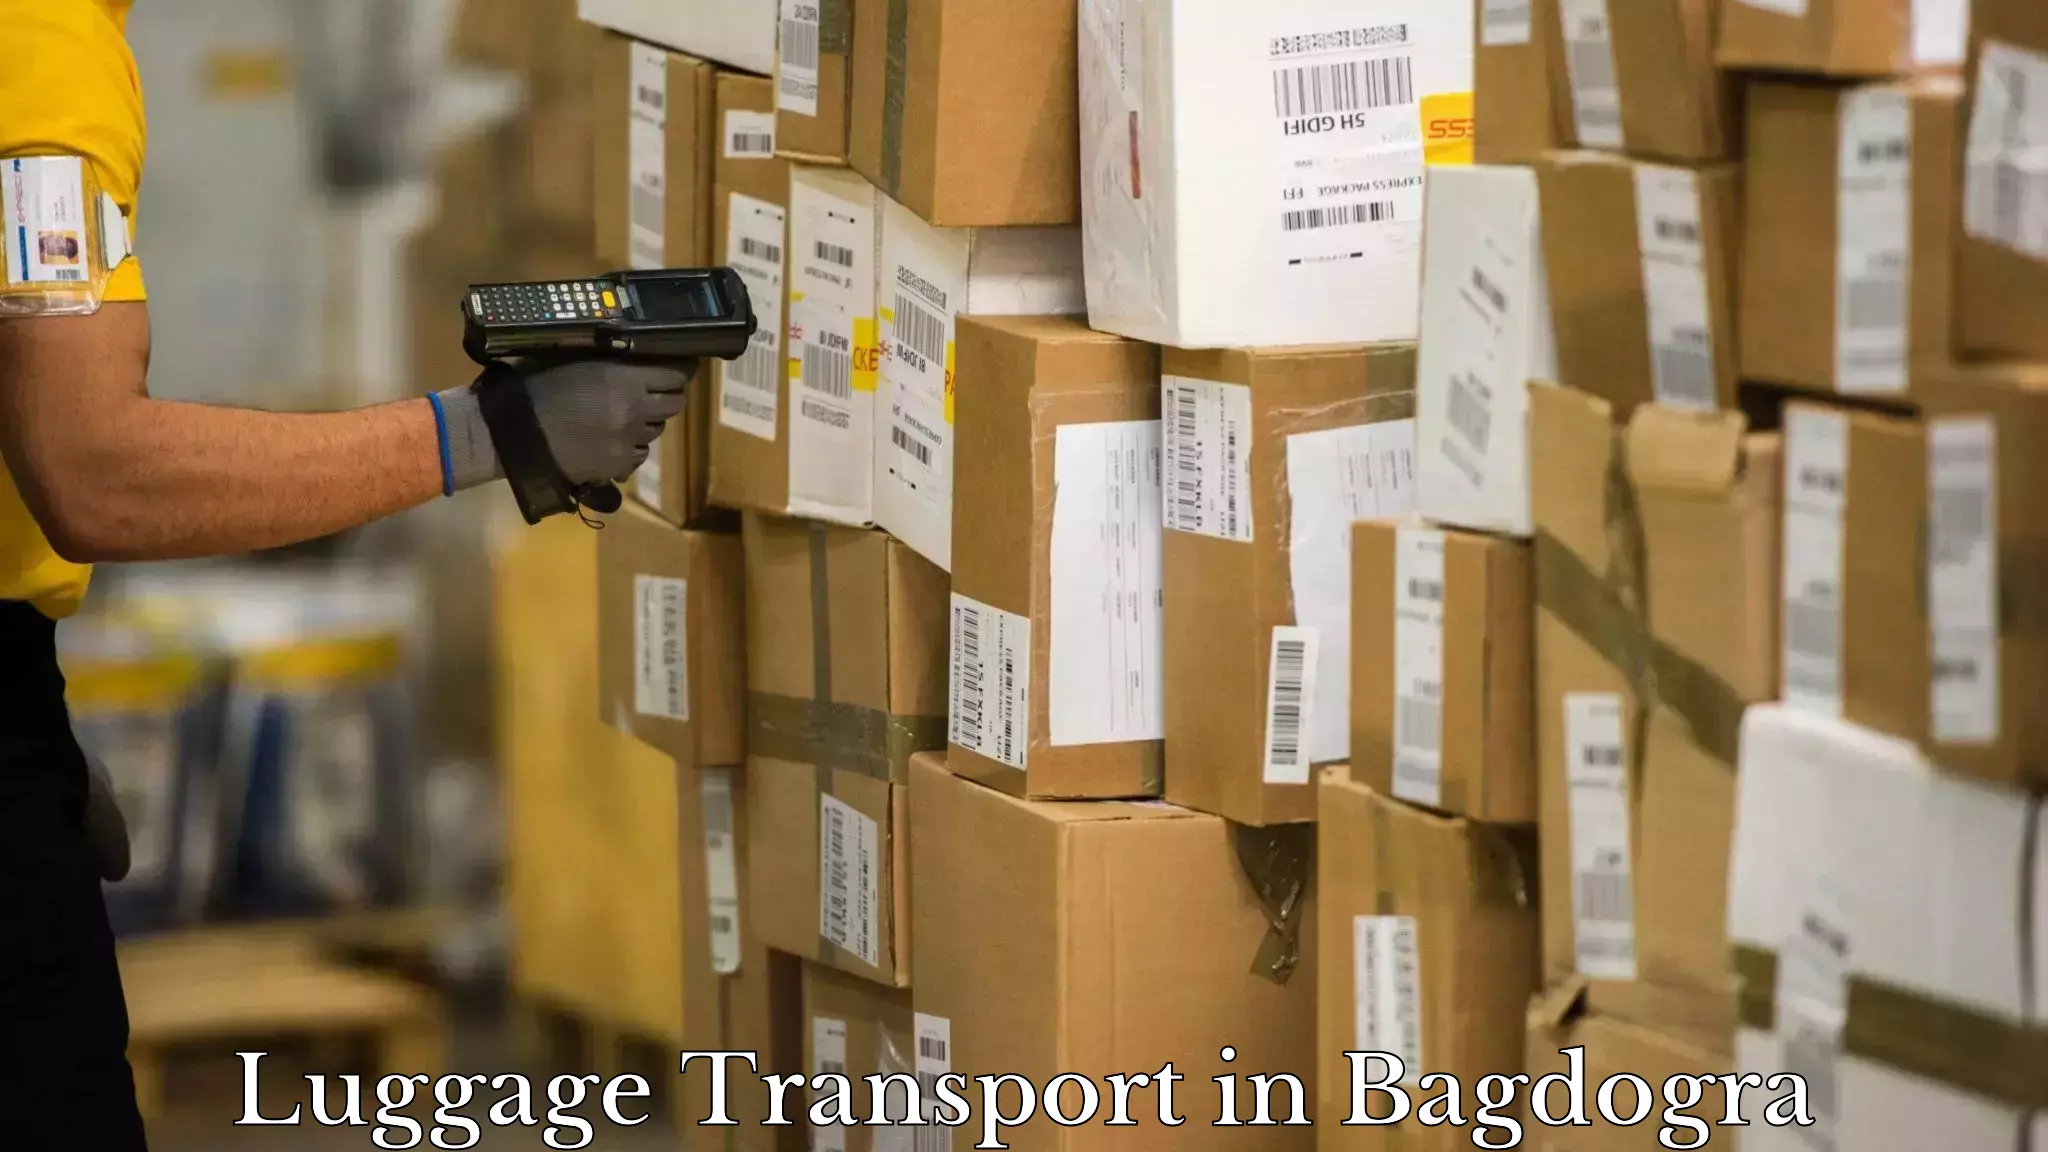 Luggage transport solutions in Bagdogra